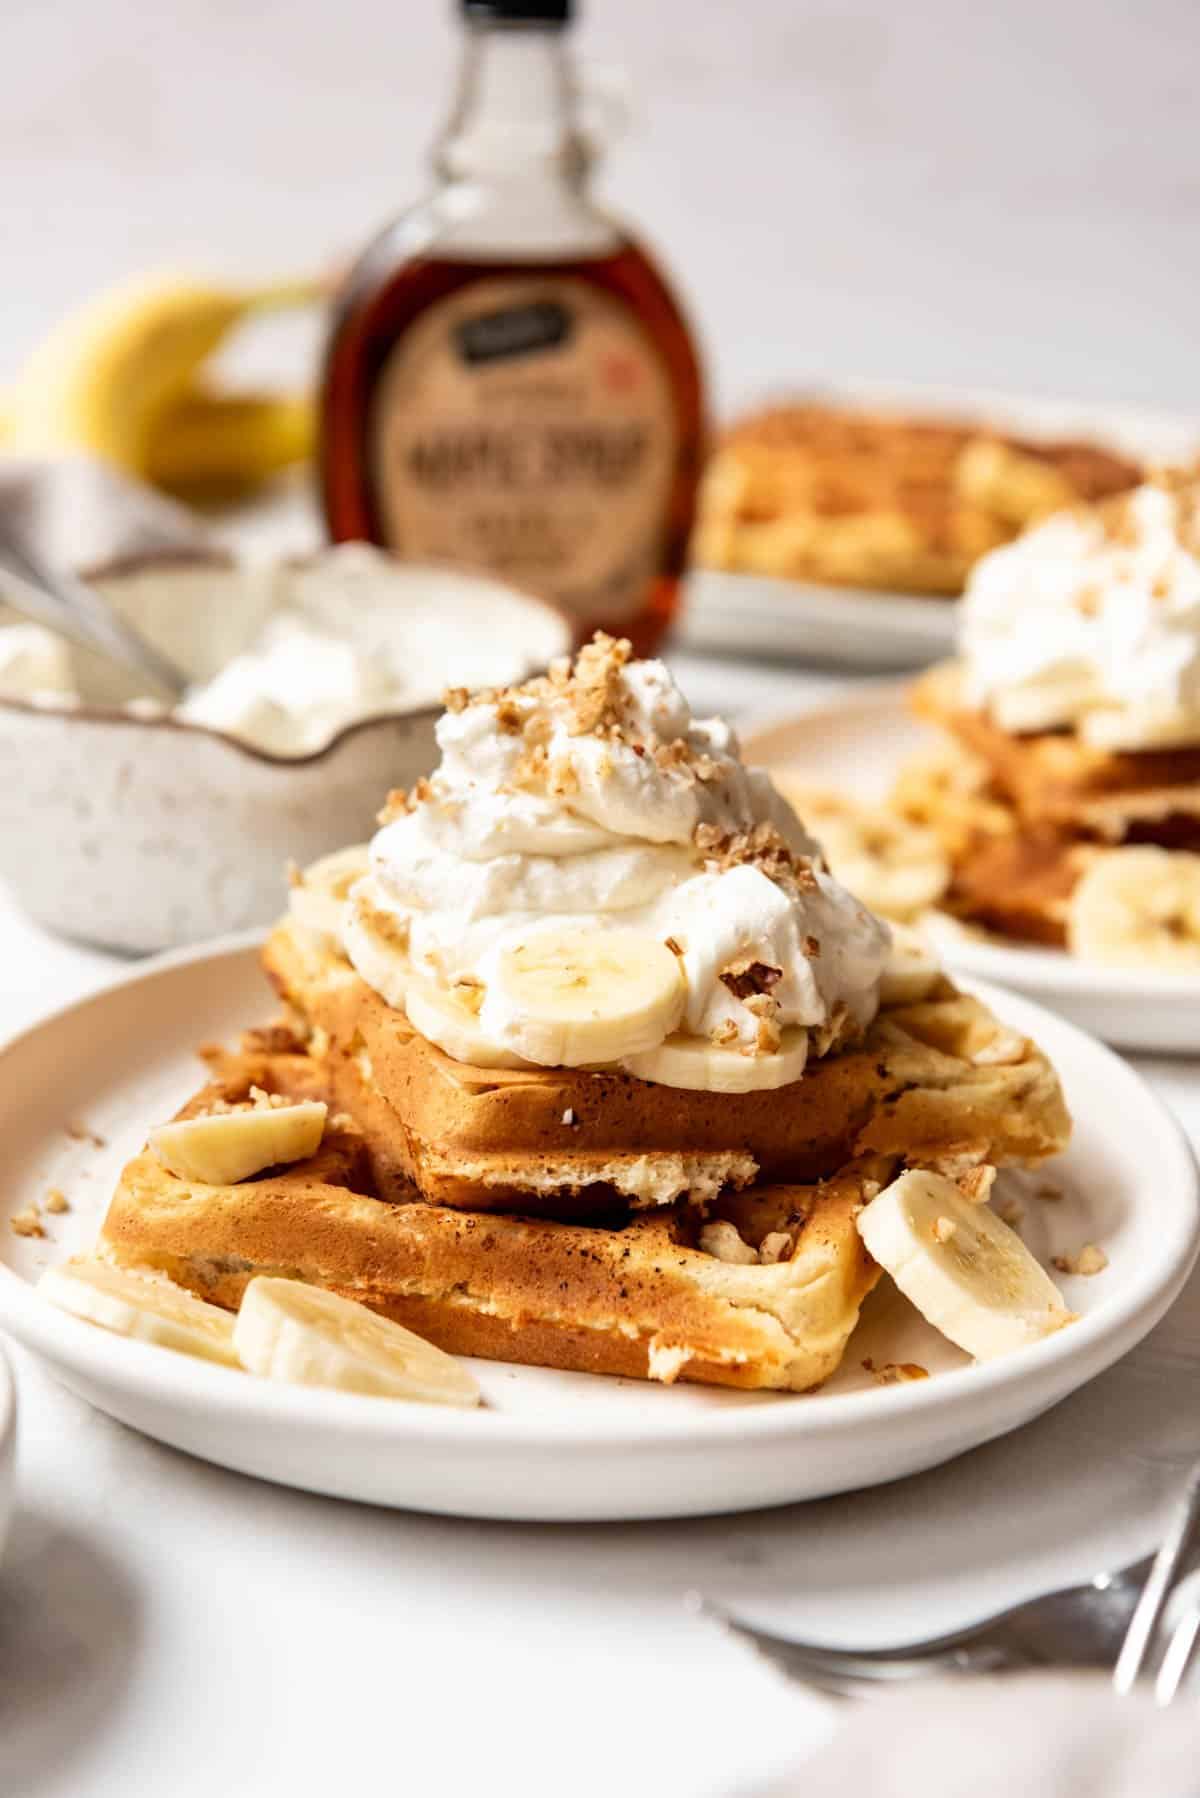 An image of banana pecan waffles on a plate with whipped cream on top and a syrup jar behind it.